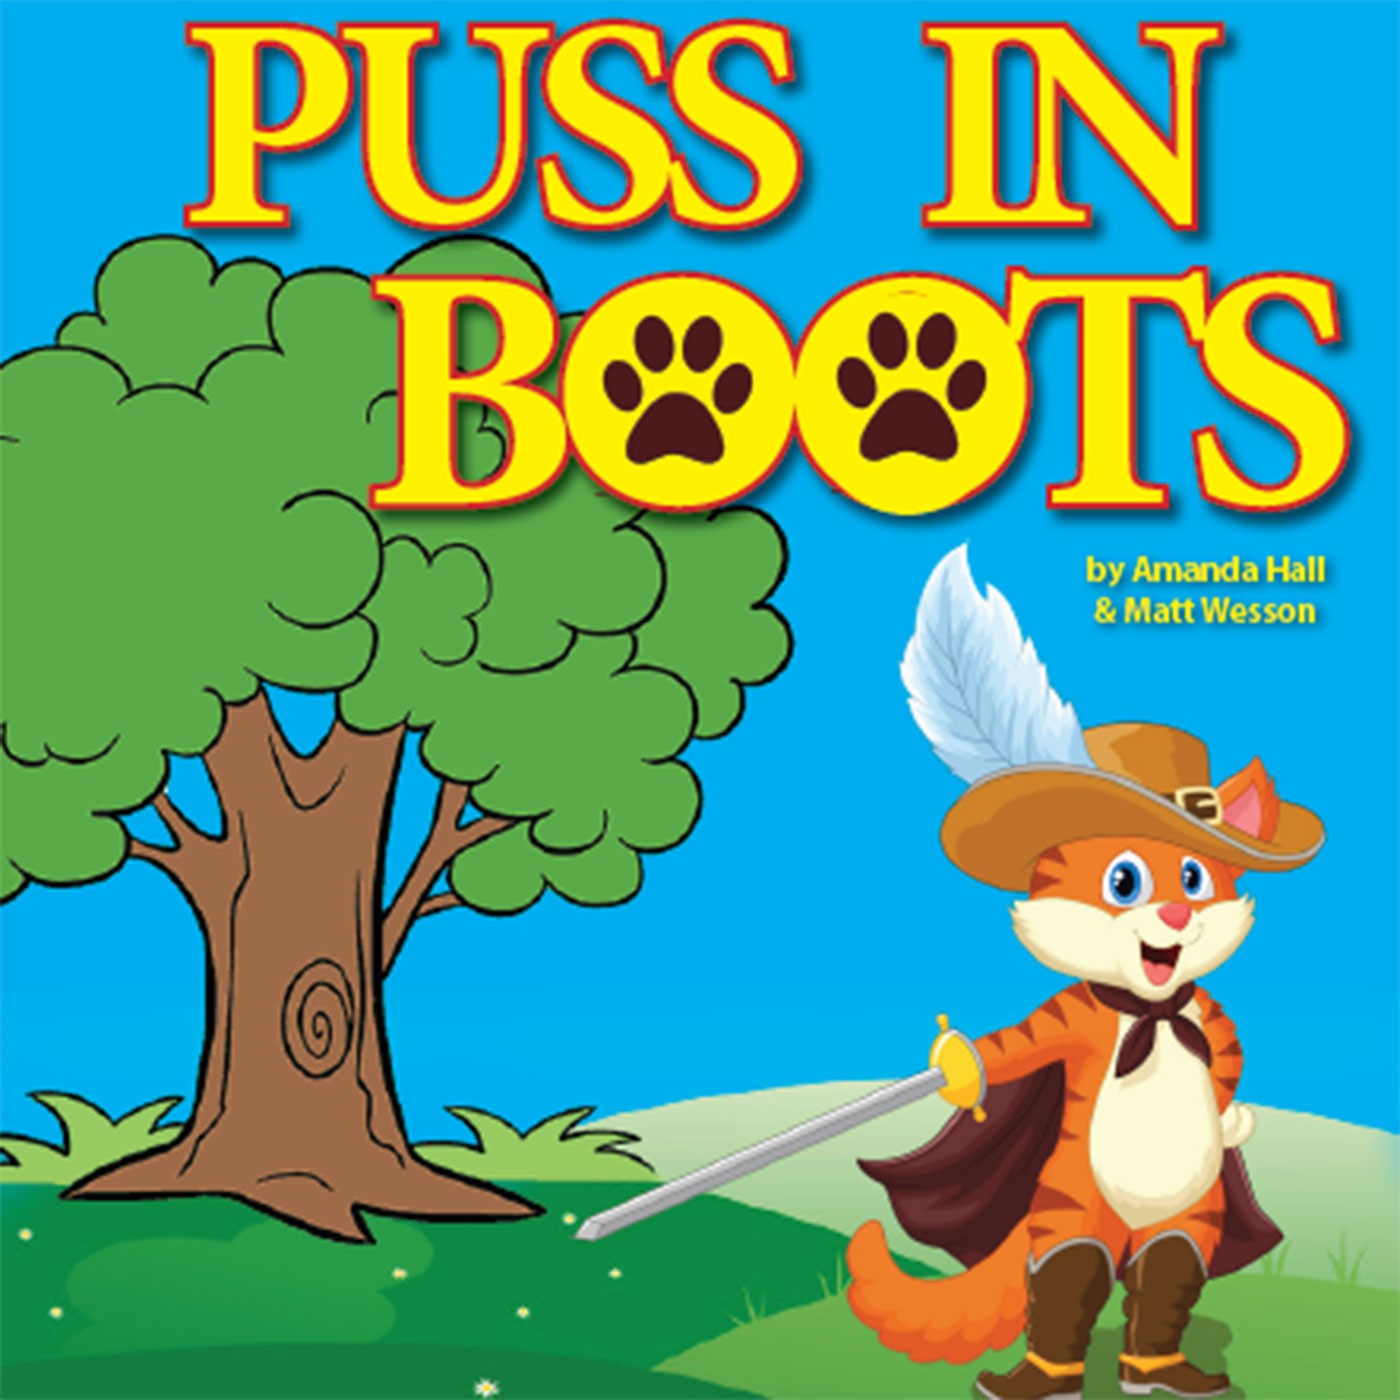 Puss In Boots 2022